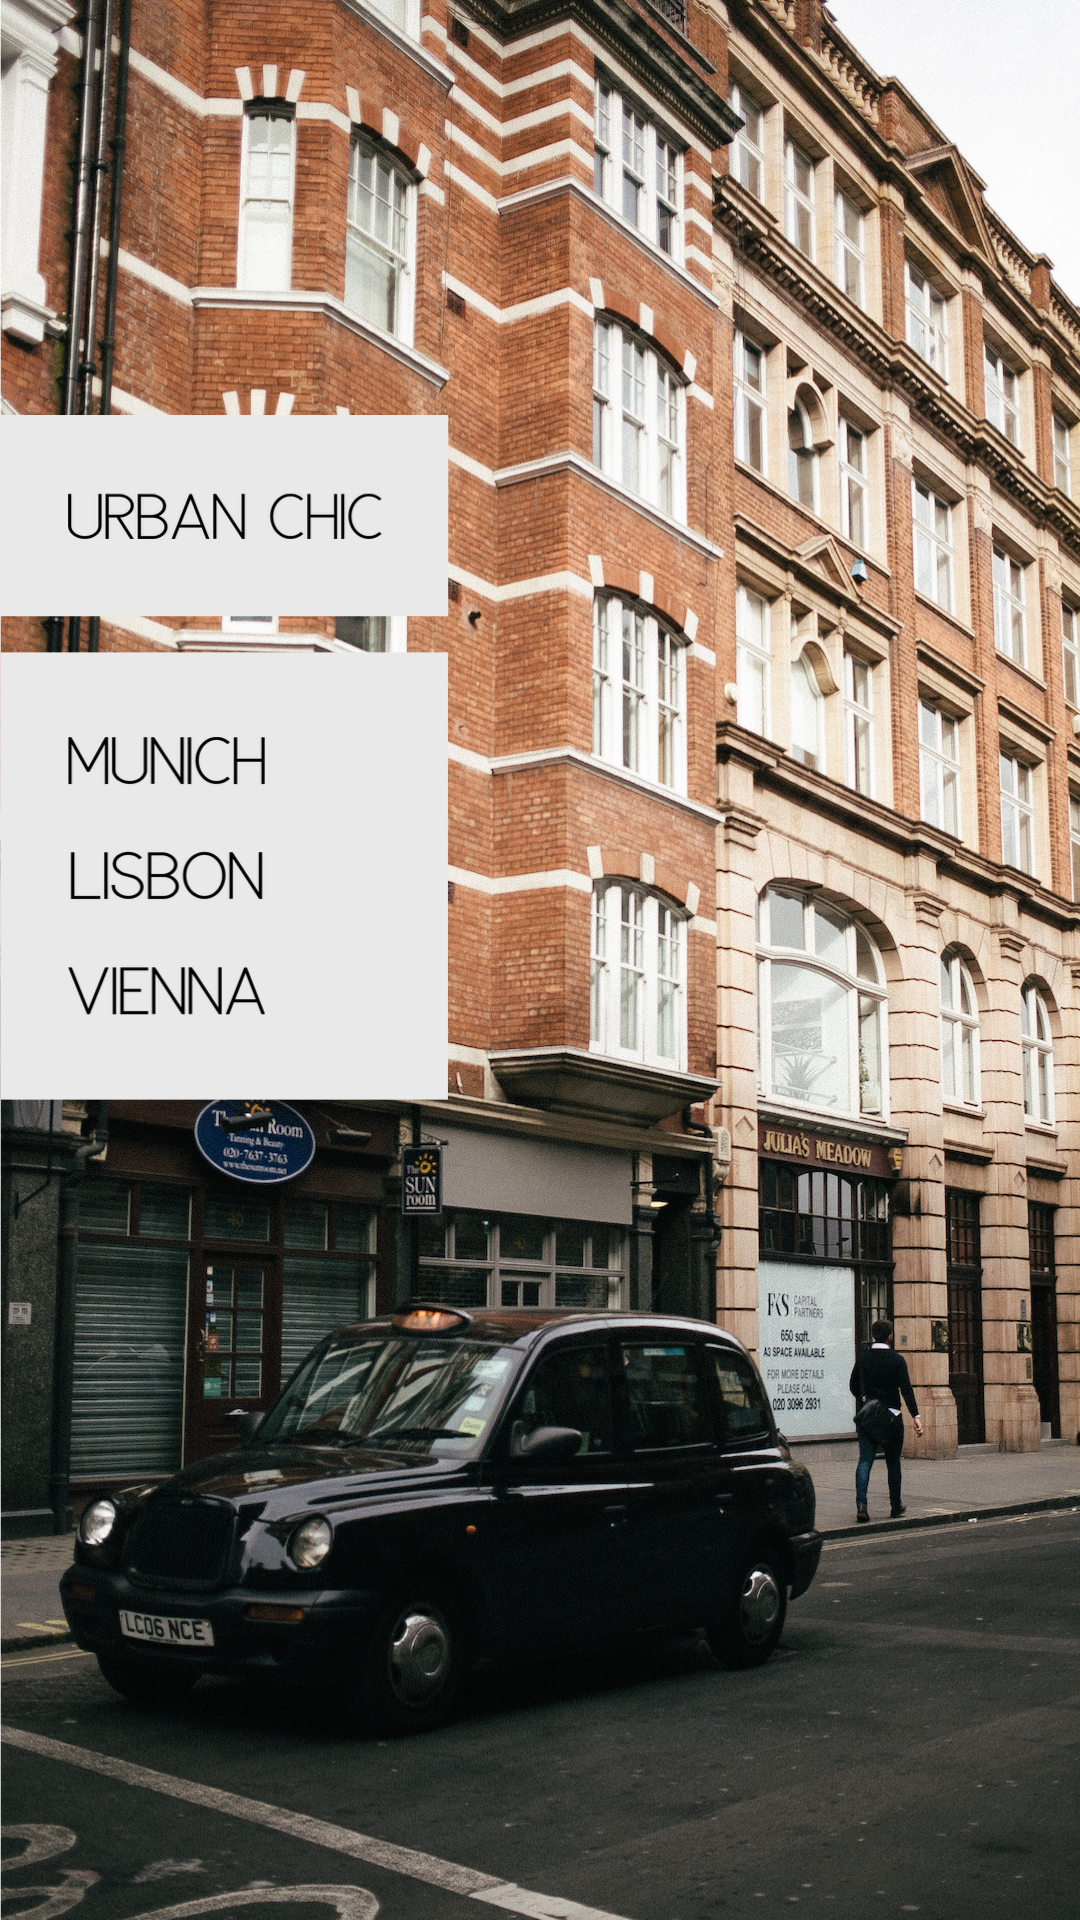 Urban chic european buildings and architecture Classy template